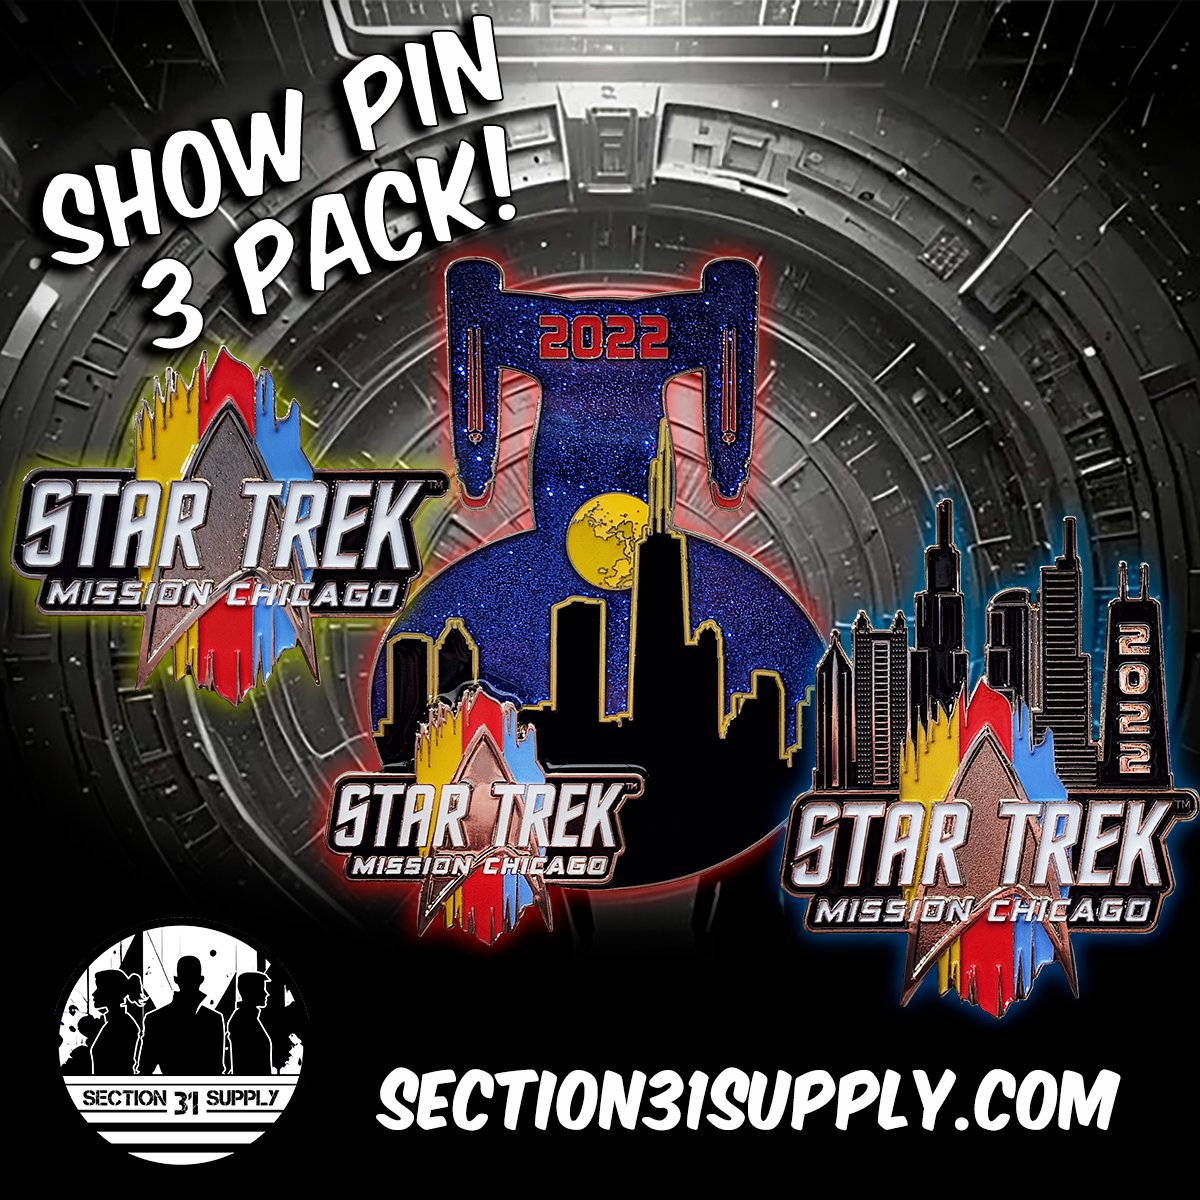 Star Trek: Mission Chicago Show 3 Pack FanSets pins